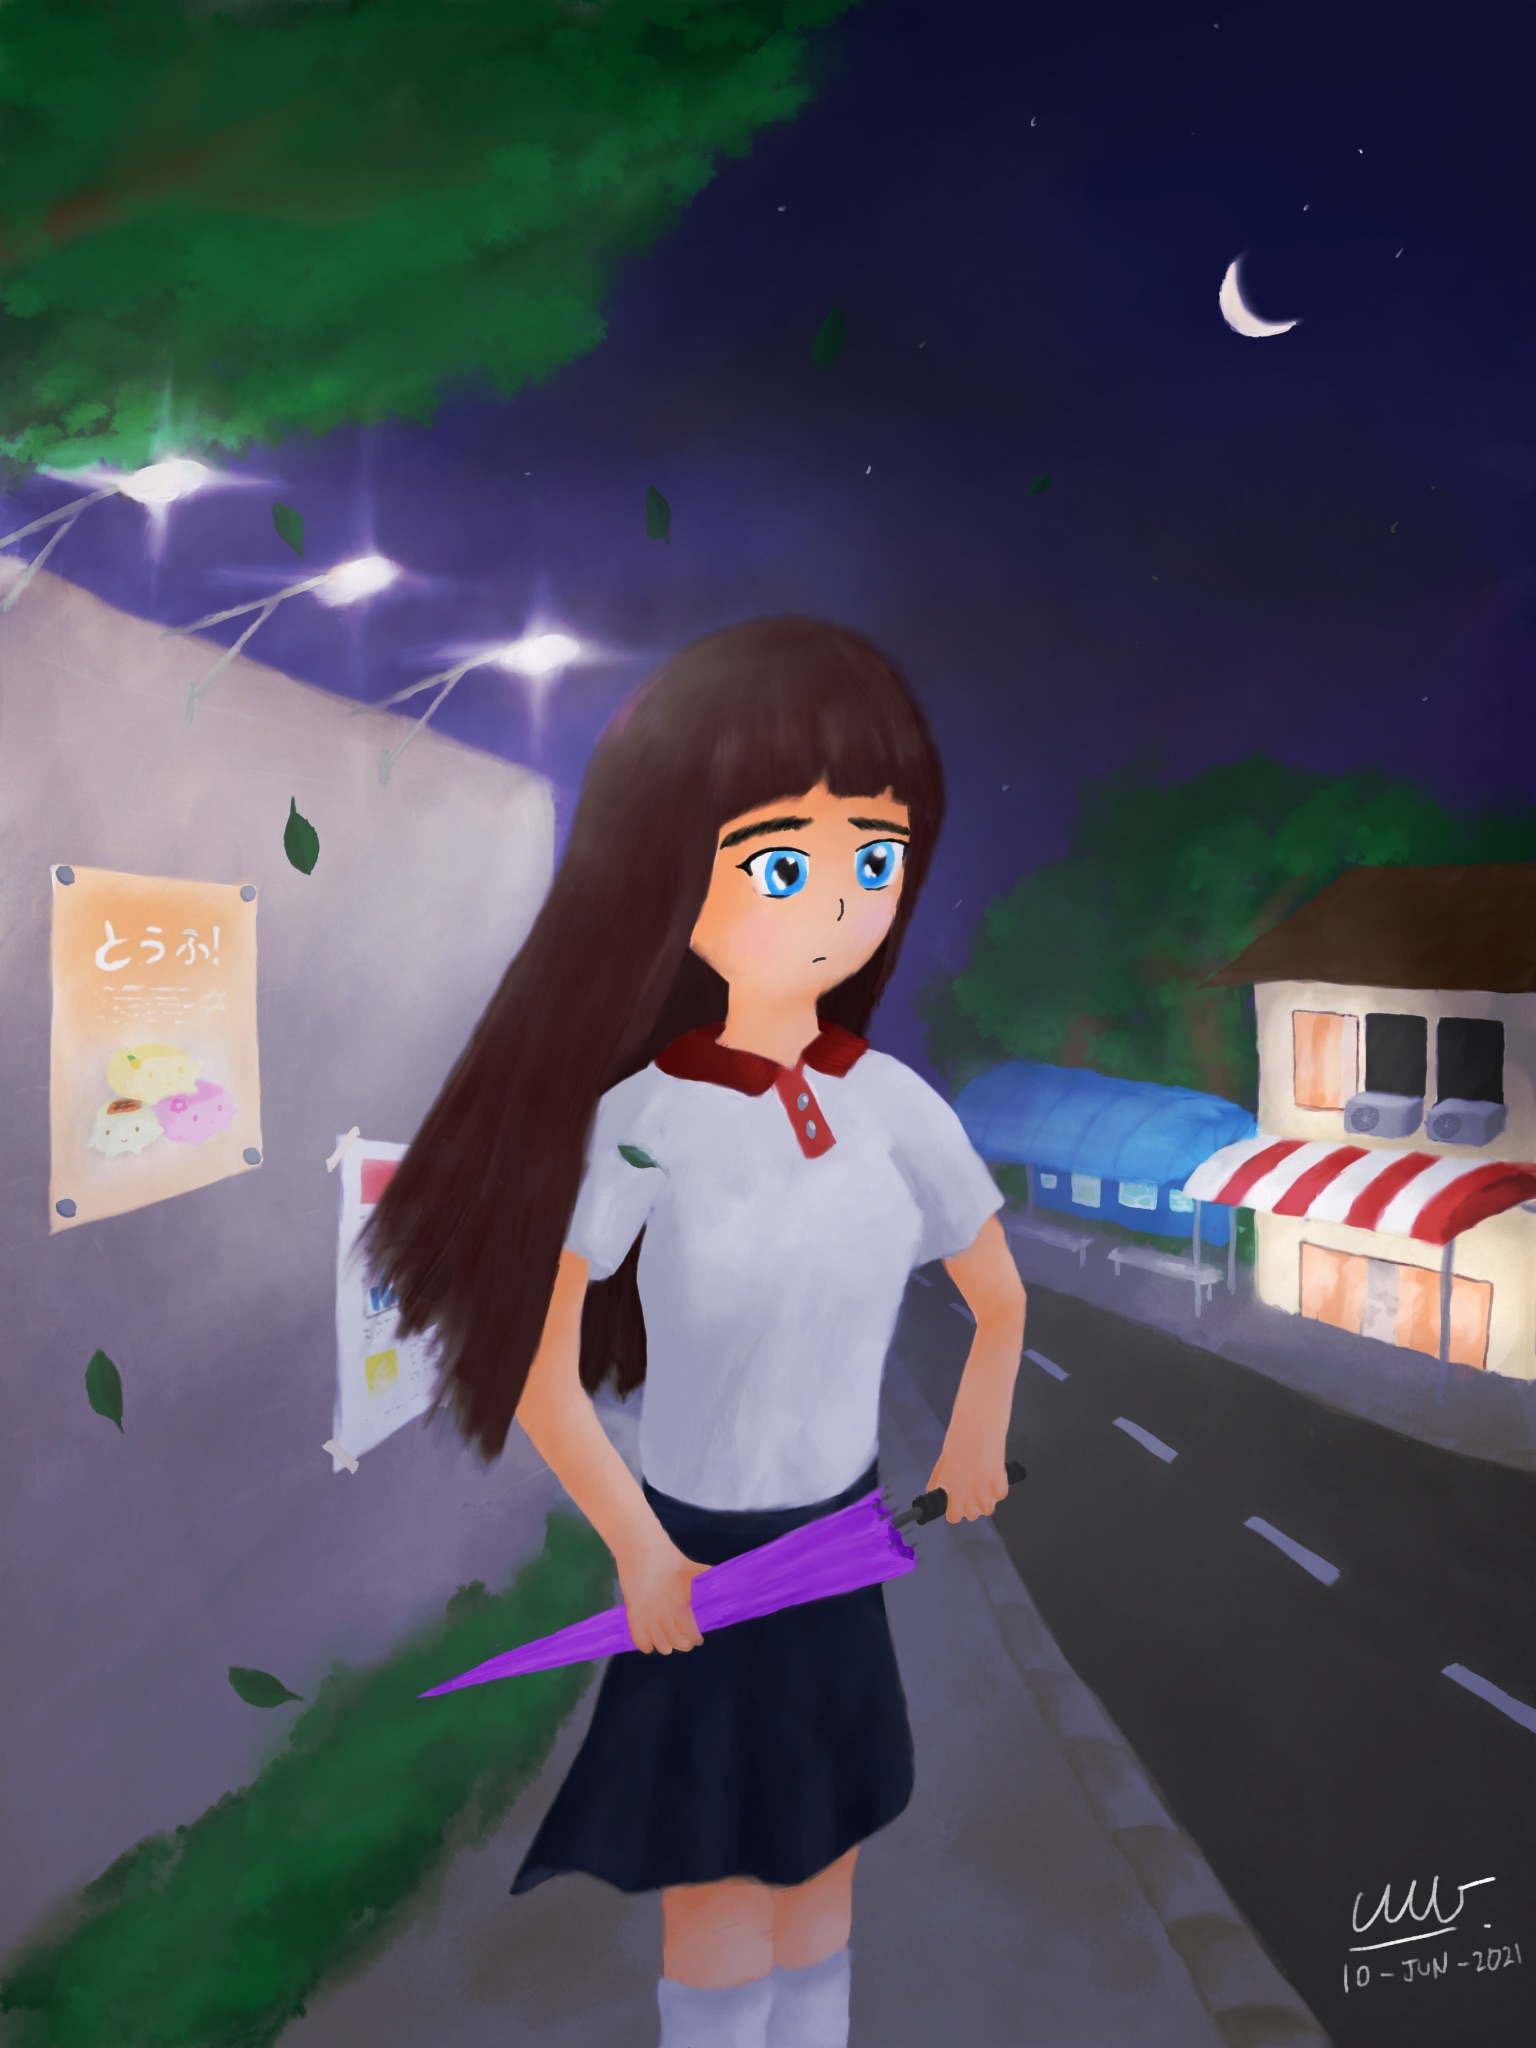 [Distant Night - Artwork Image Description]: An e-watercolour painting featuring a small night-time roadside scenery. The foreground depicts a 3/4 portrait of a girl, facing to her left, standing on the pavement holding an umbrella. She can be seen wearing a white T-shirt with red collars and a dark blue skirt, gazing as if pondering at something afar. A wall with posters attached are visible on her right, with lamps illuminating from the wall-top. Leaves are seen dropping from a tree above her, as wind blows slightly from behind to her right. In the background, a two-story building can be seen behind, across the road to her left, with a bus stop next to it. The sky is mostly clear with a cresent moon and stars, though very minor amounts of clouds are present.